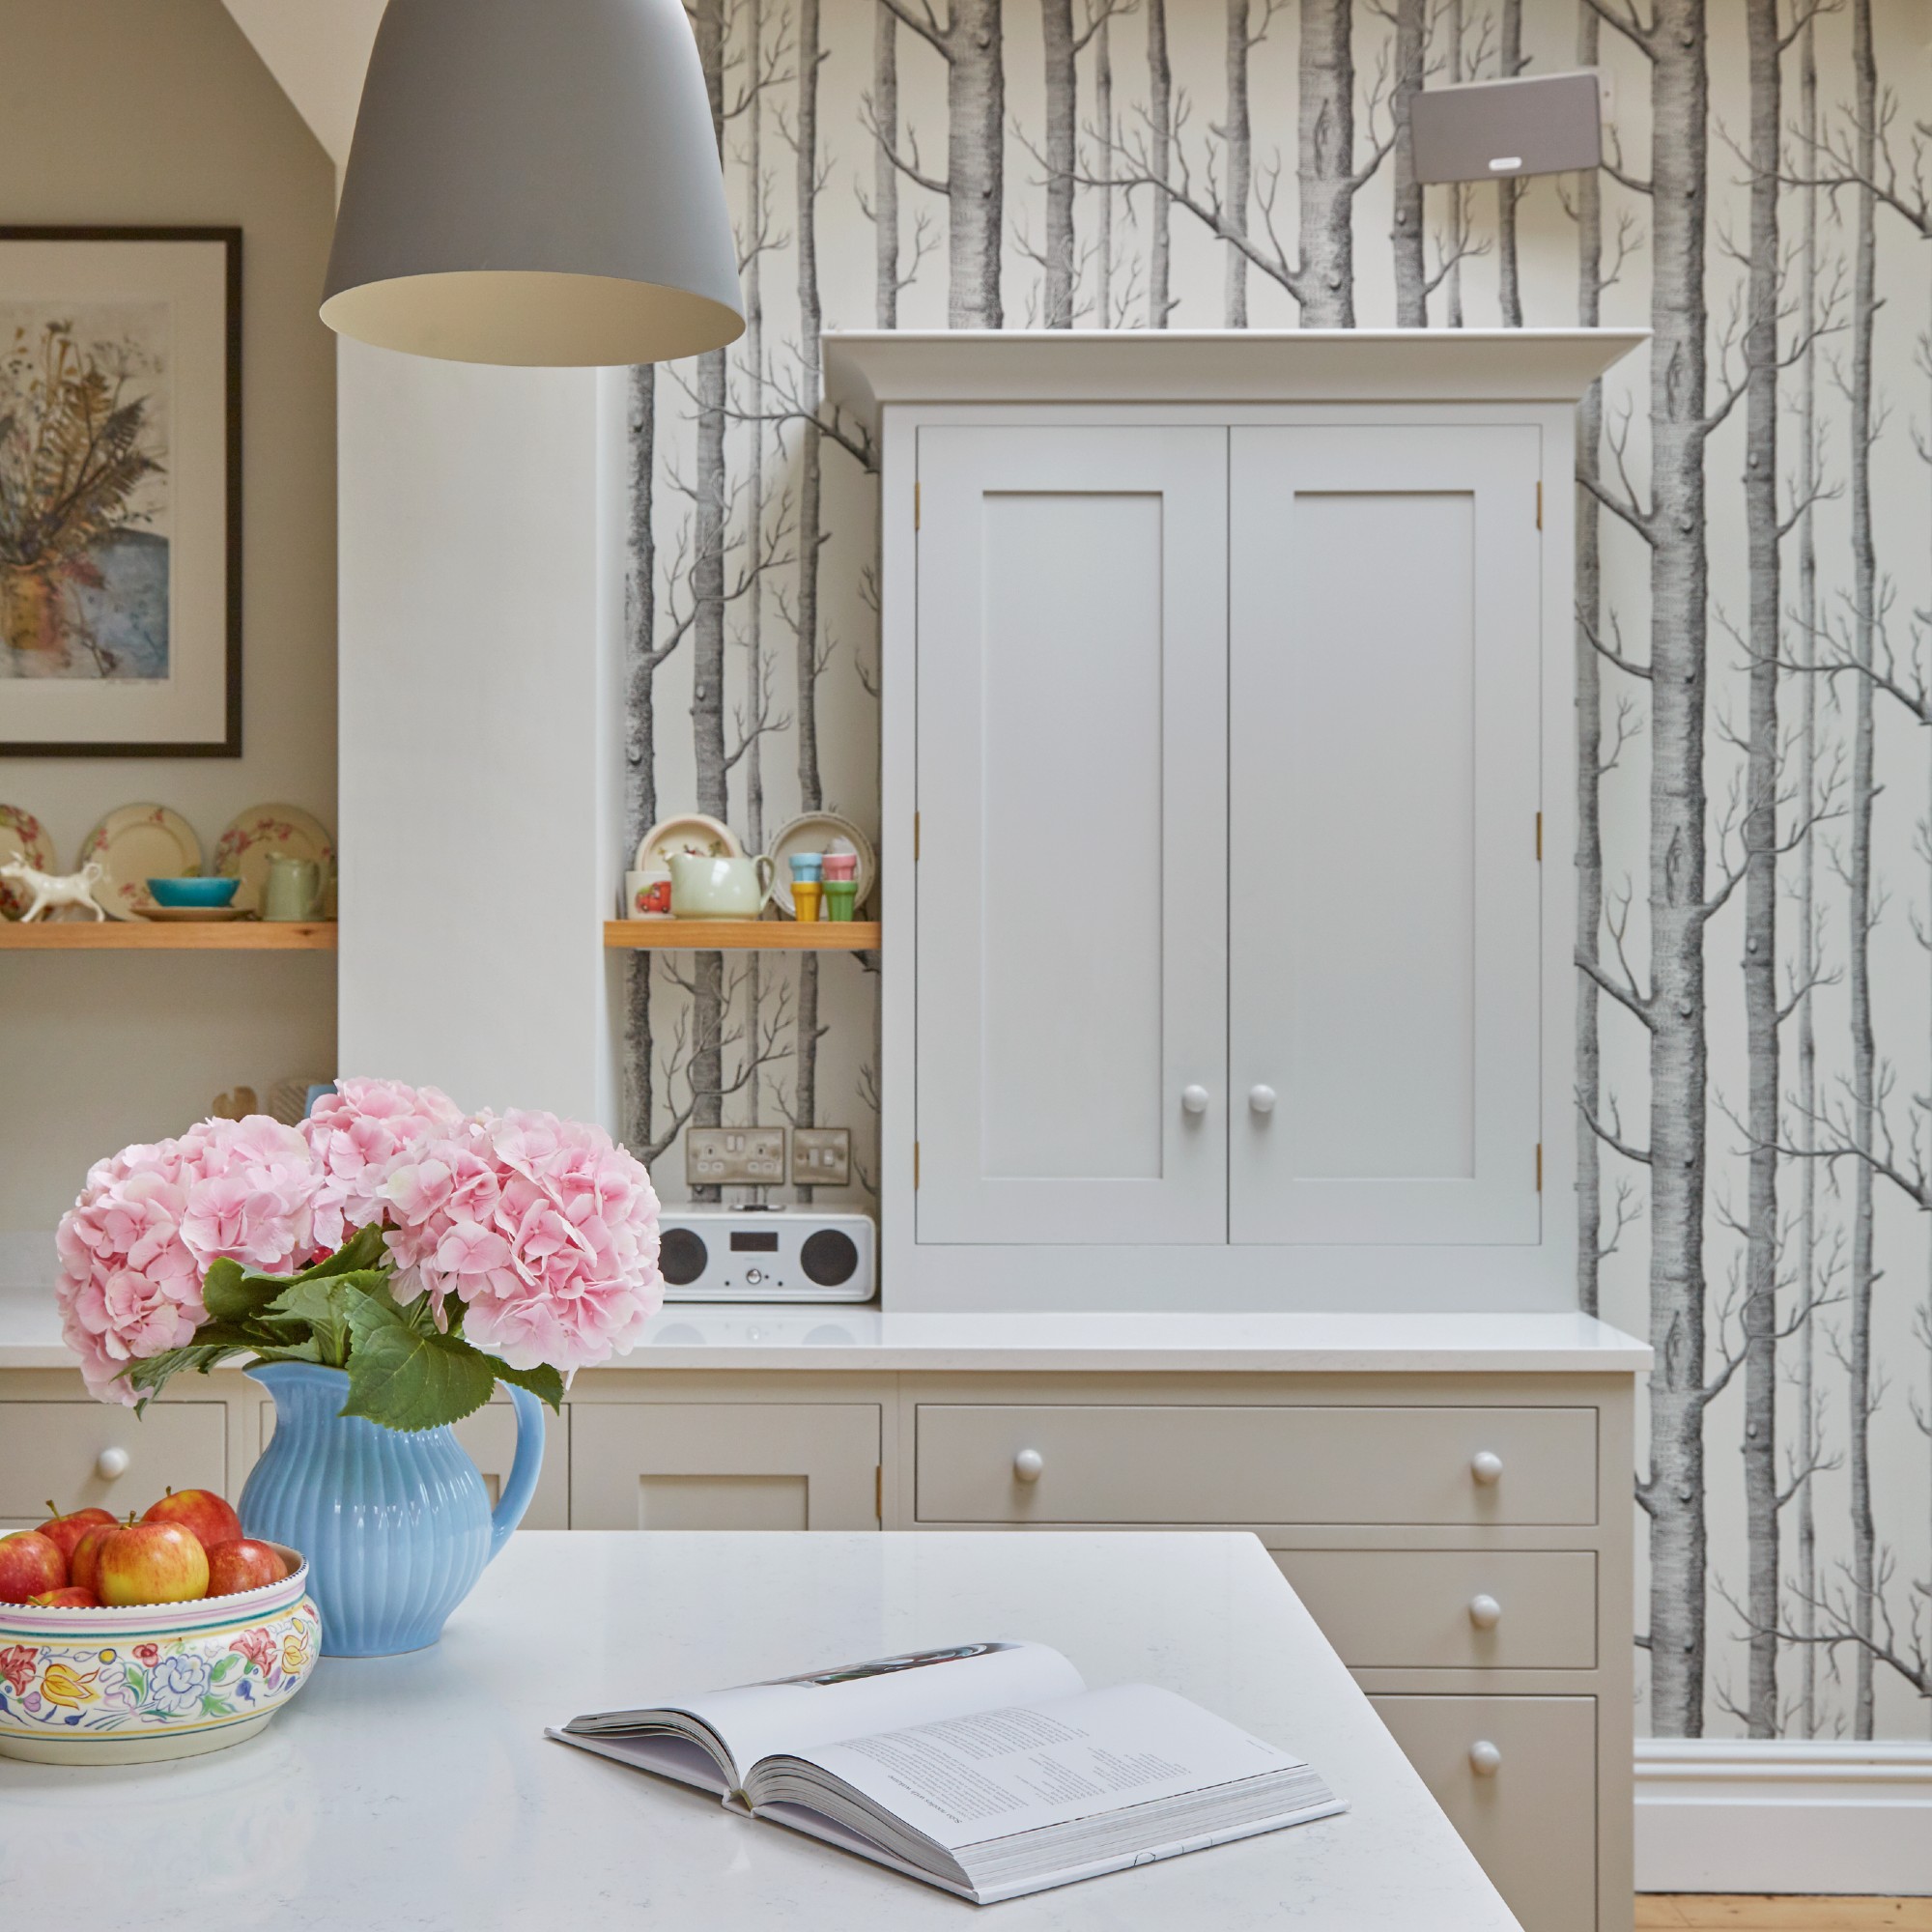 A kitchen with a feature wallpaper wall